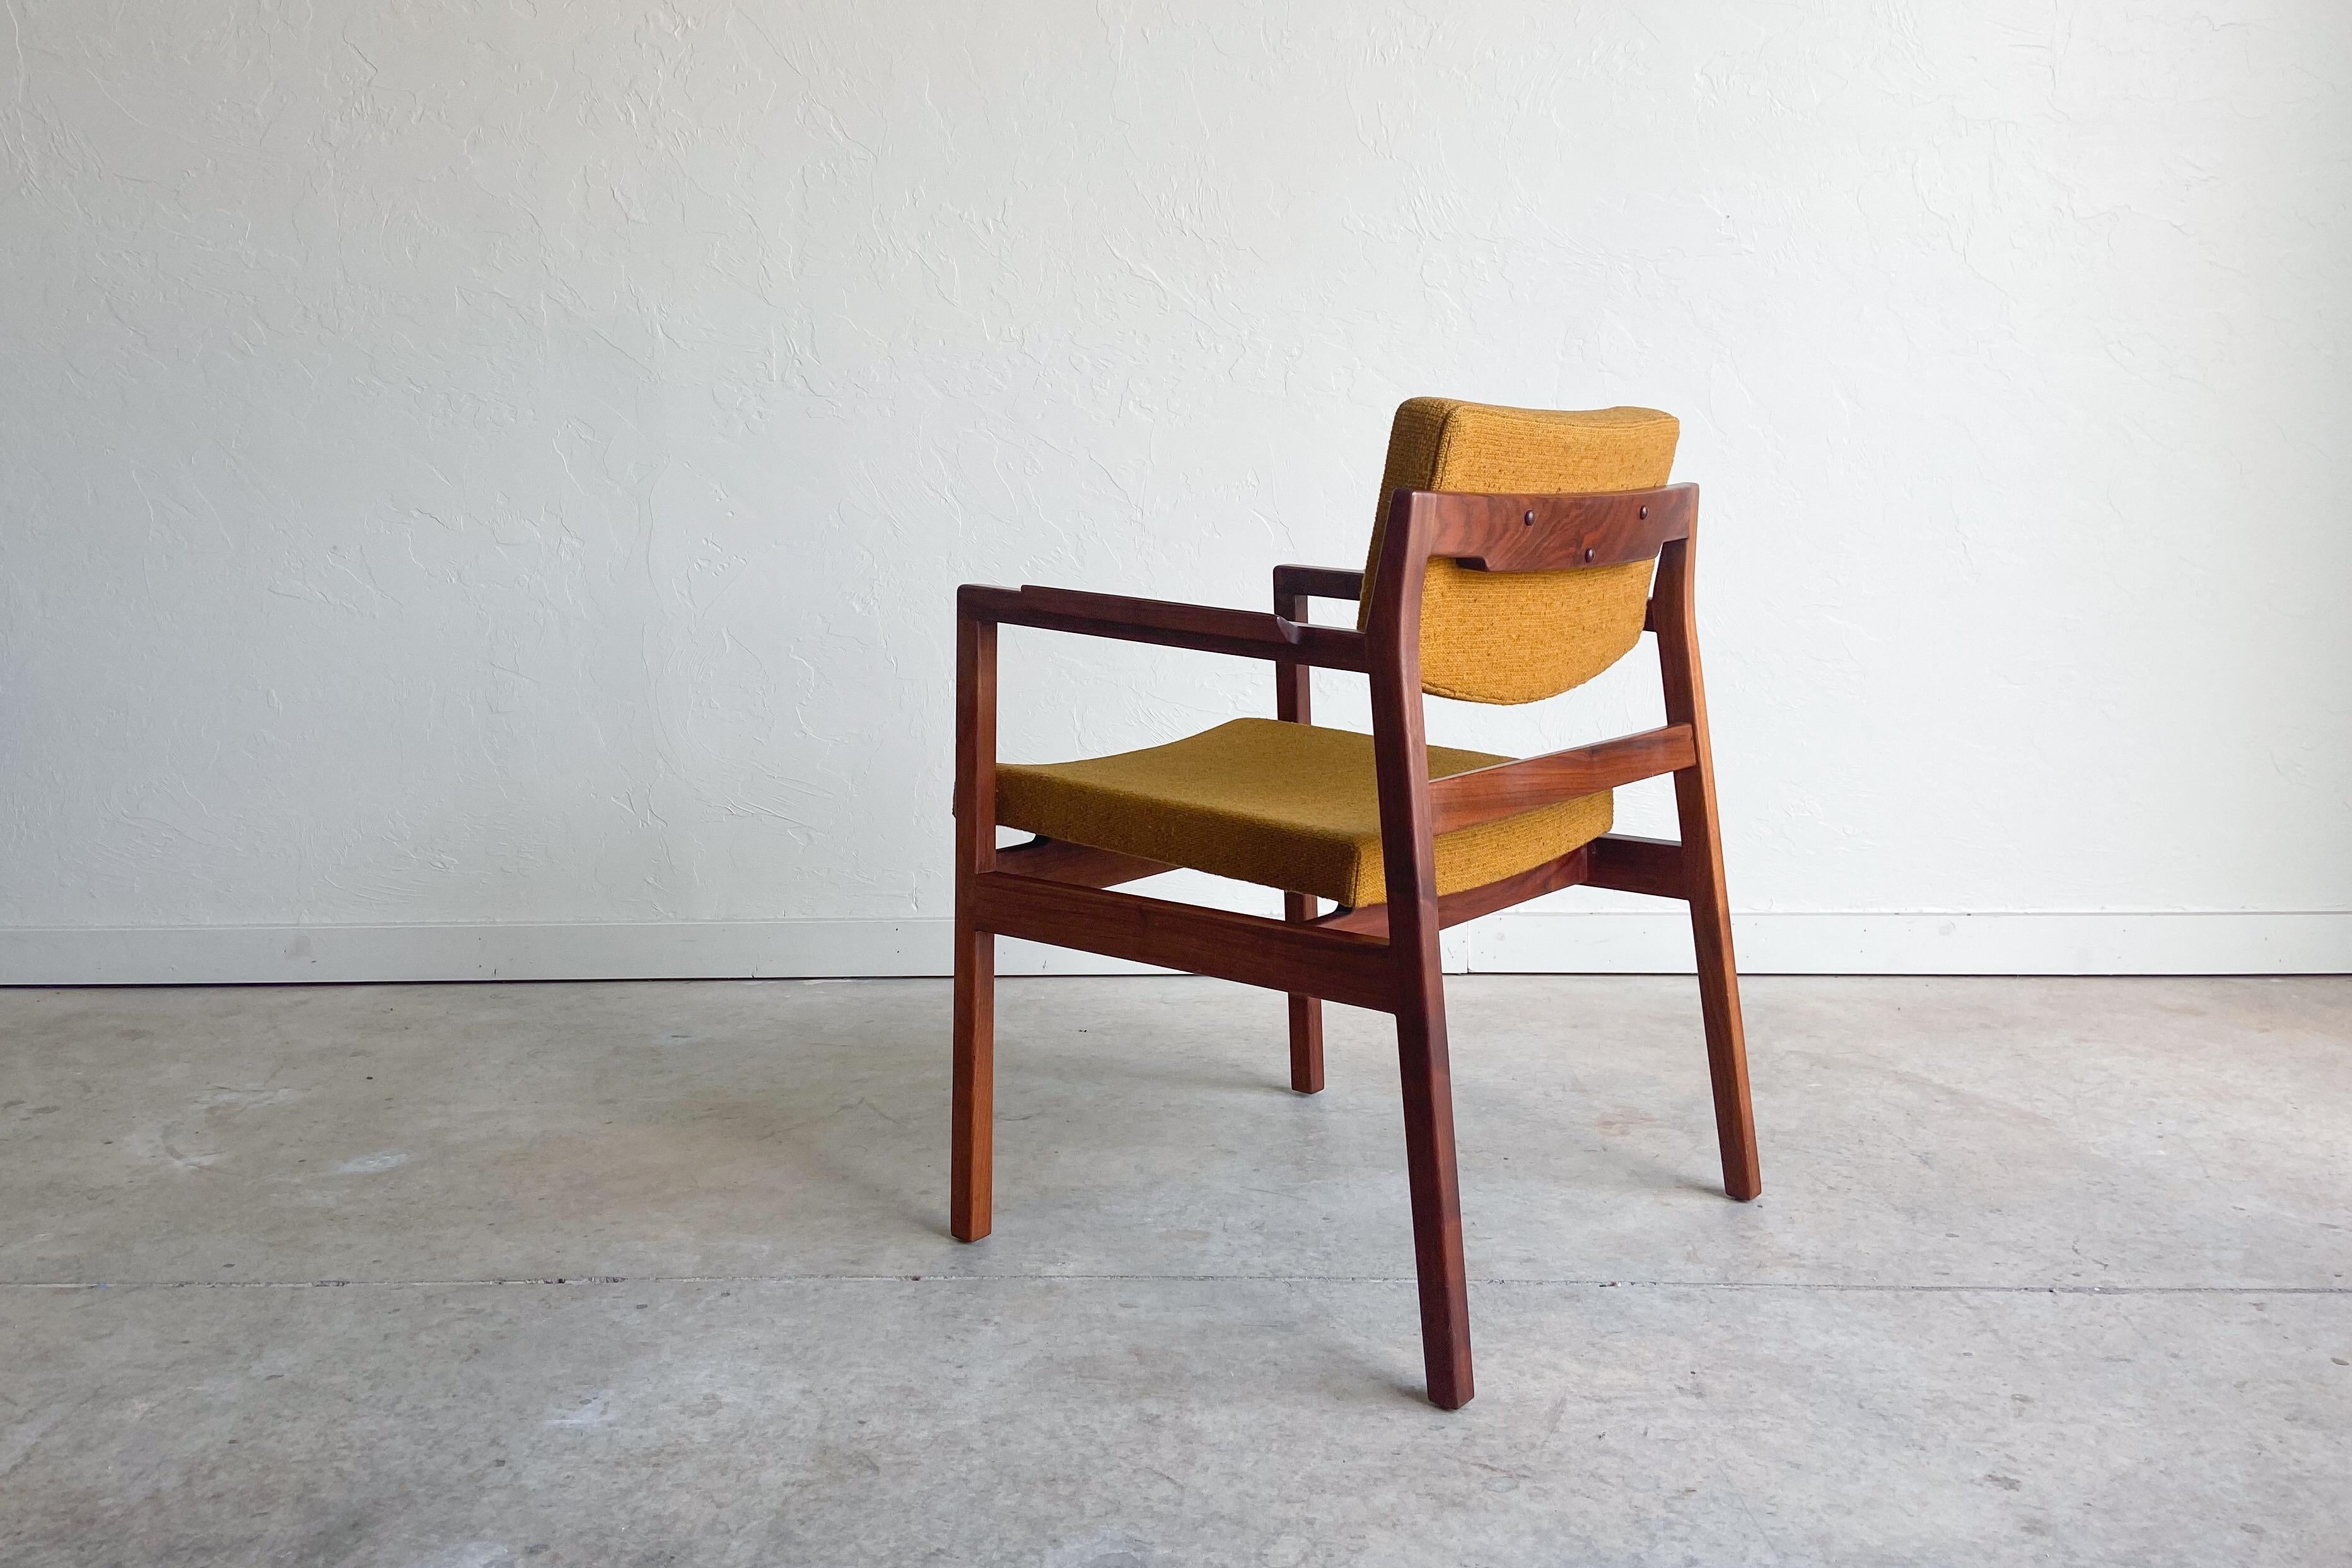 A solid walnut armchair designed by Jens Risom. 

Architectural in design, with clean lines and sculpted armrests. Would function well as a desk chair or side chair. 

Offered in excellent original condition.